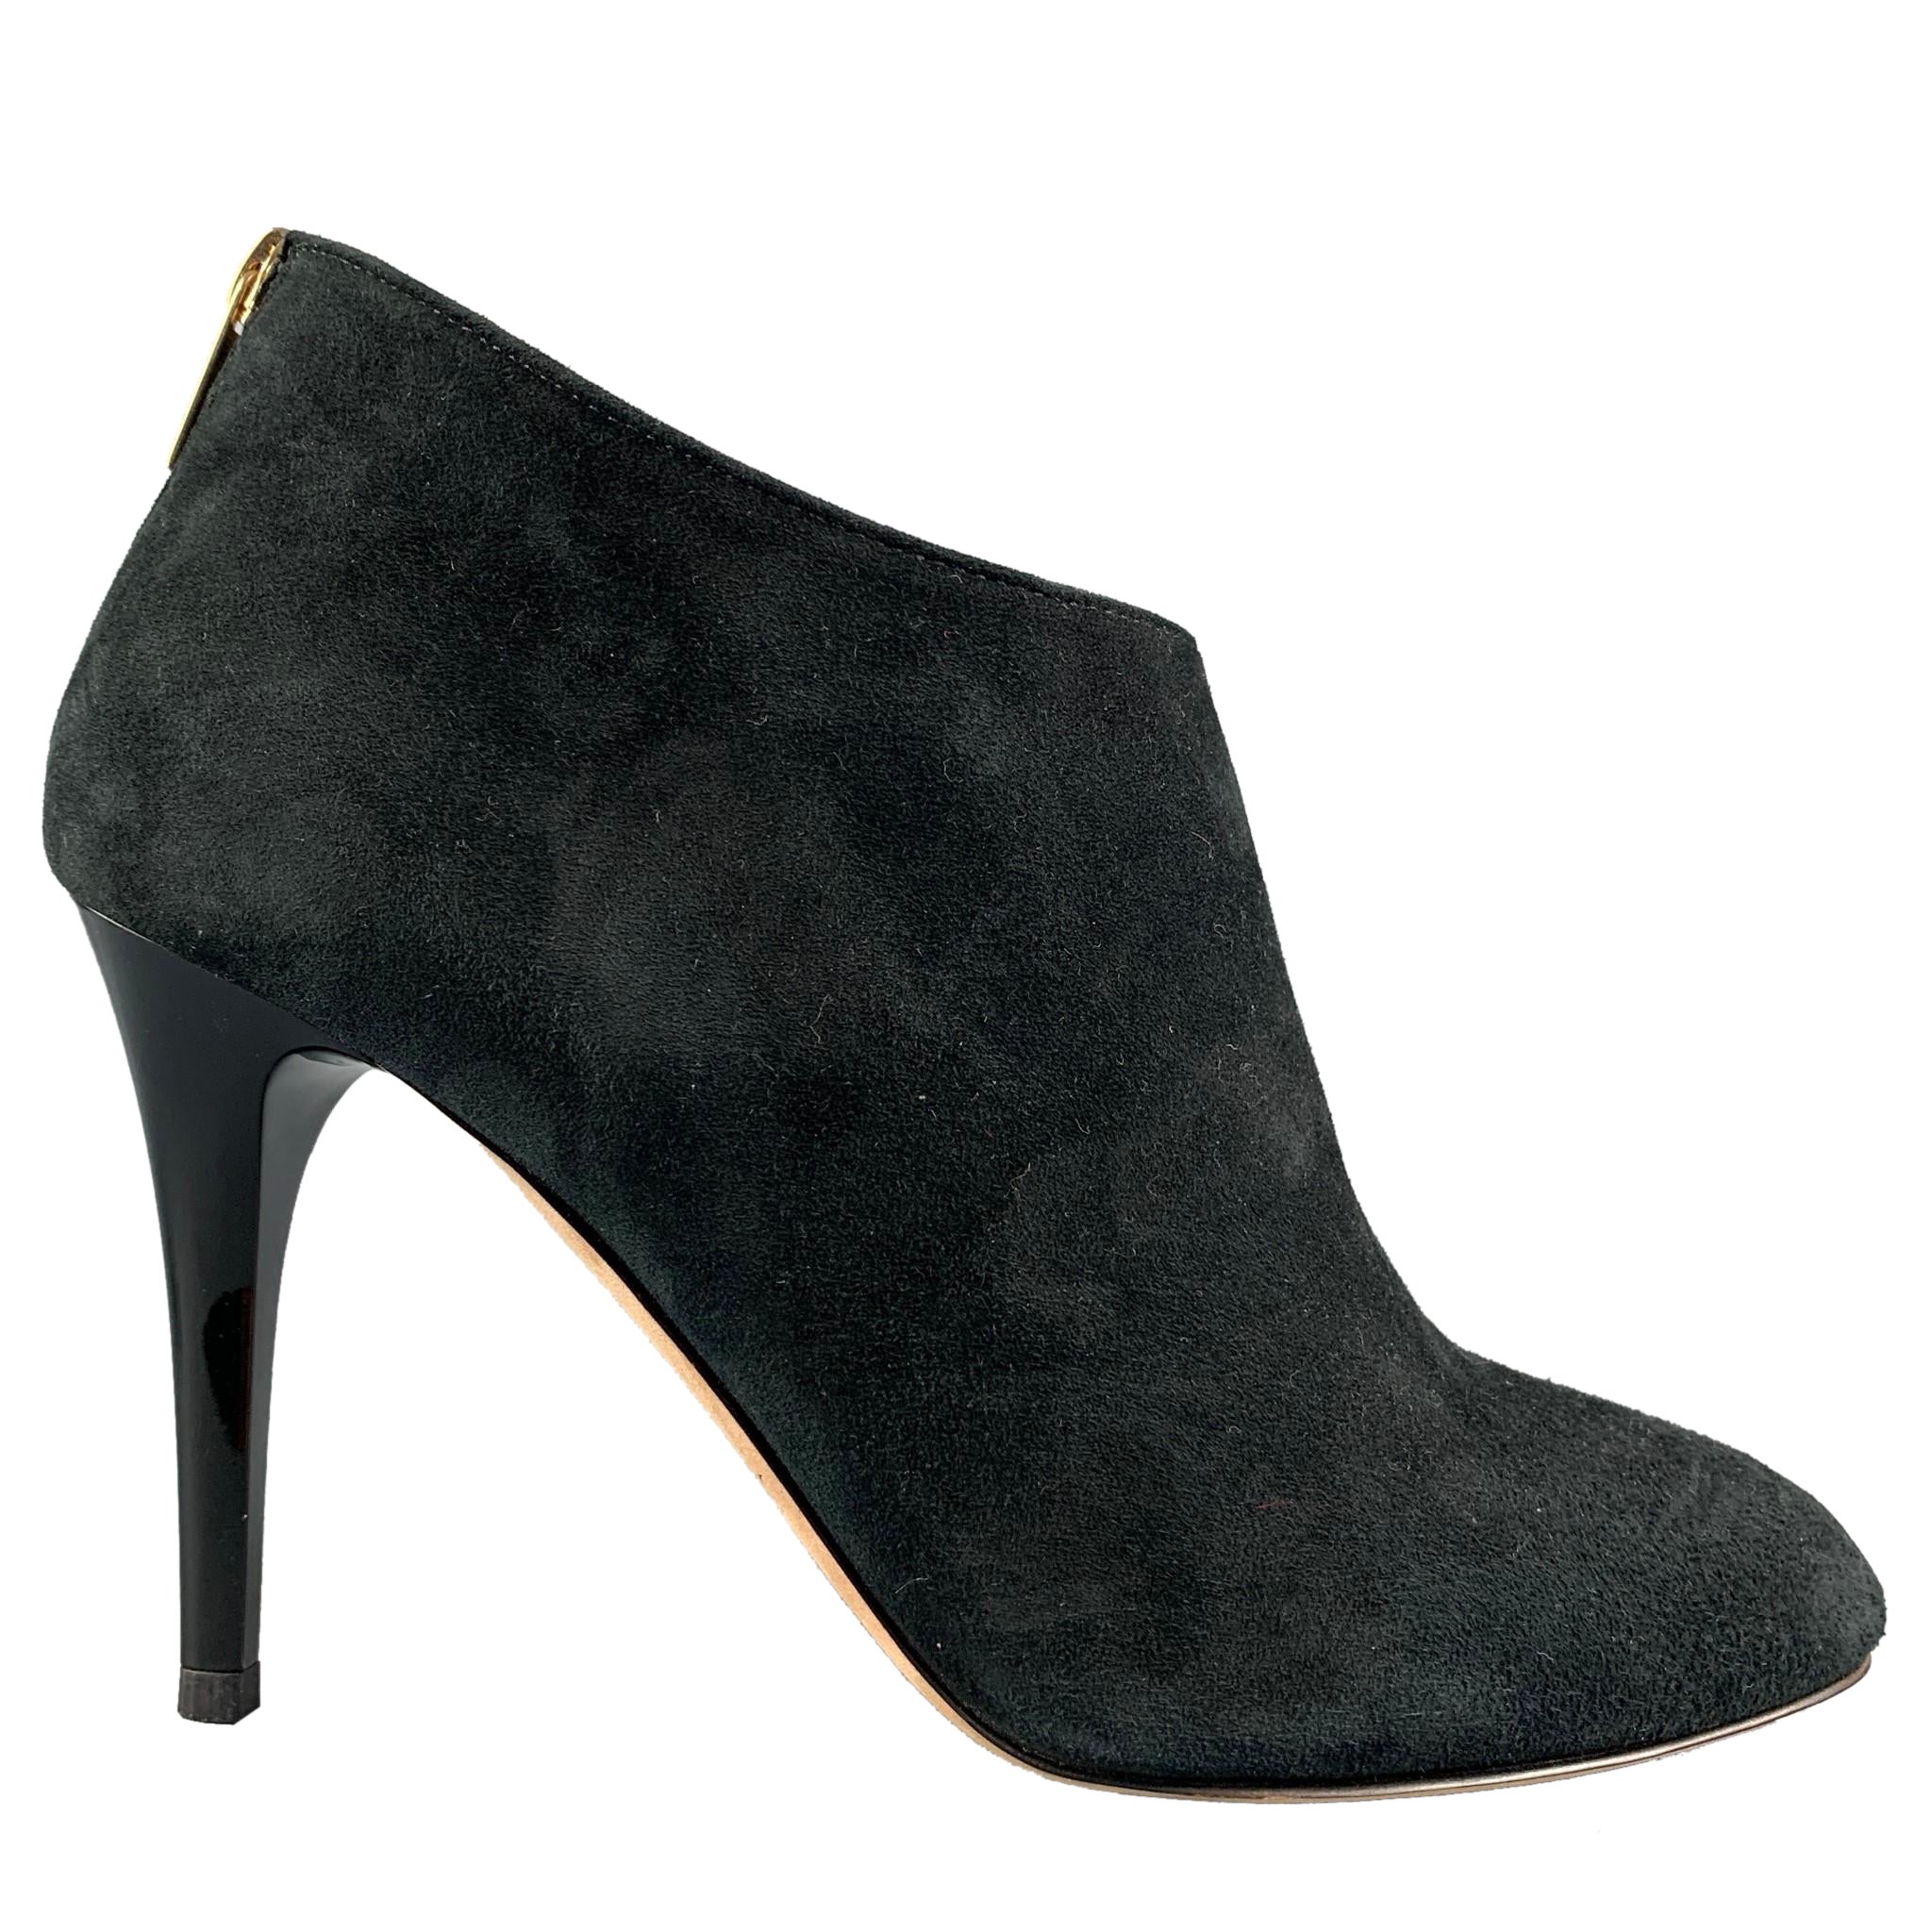 JIMMY CHOO Size 8 Black Suede Ankle Boots